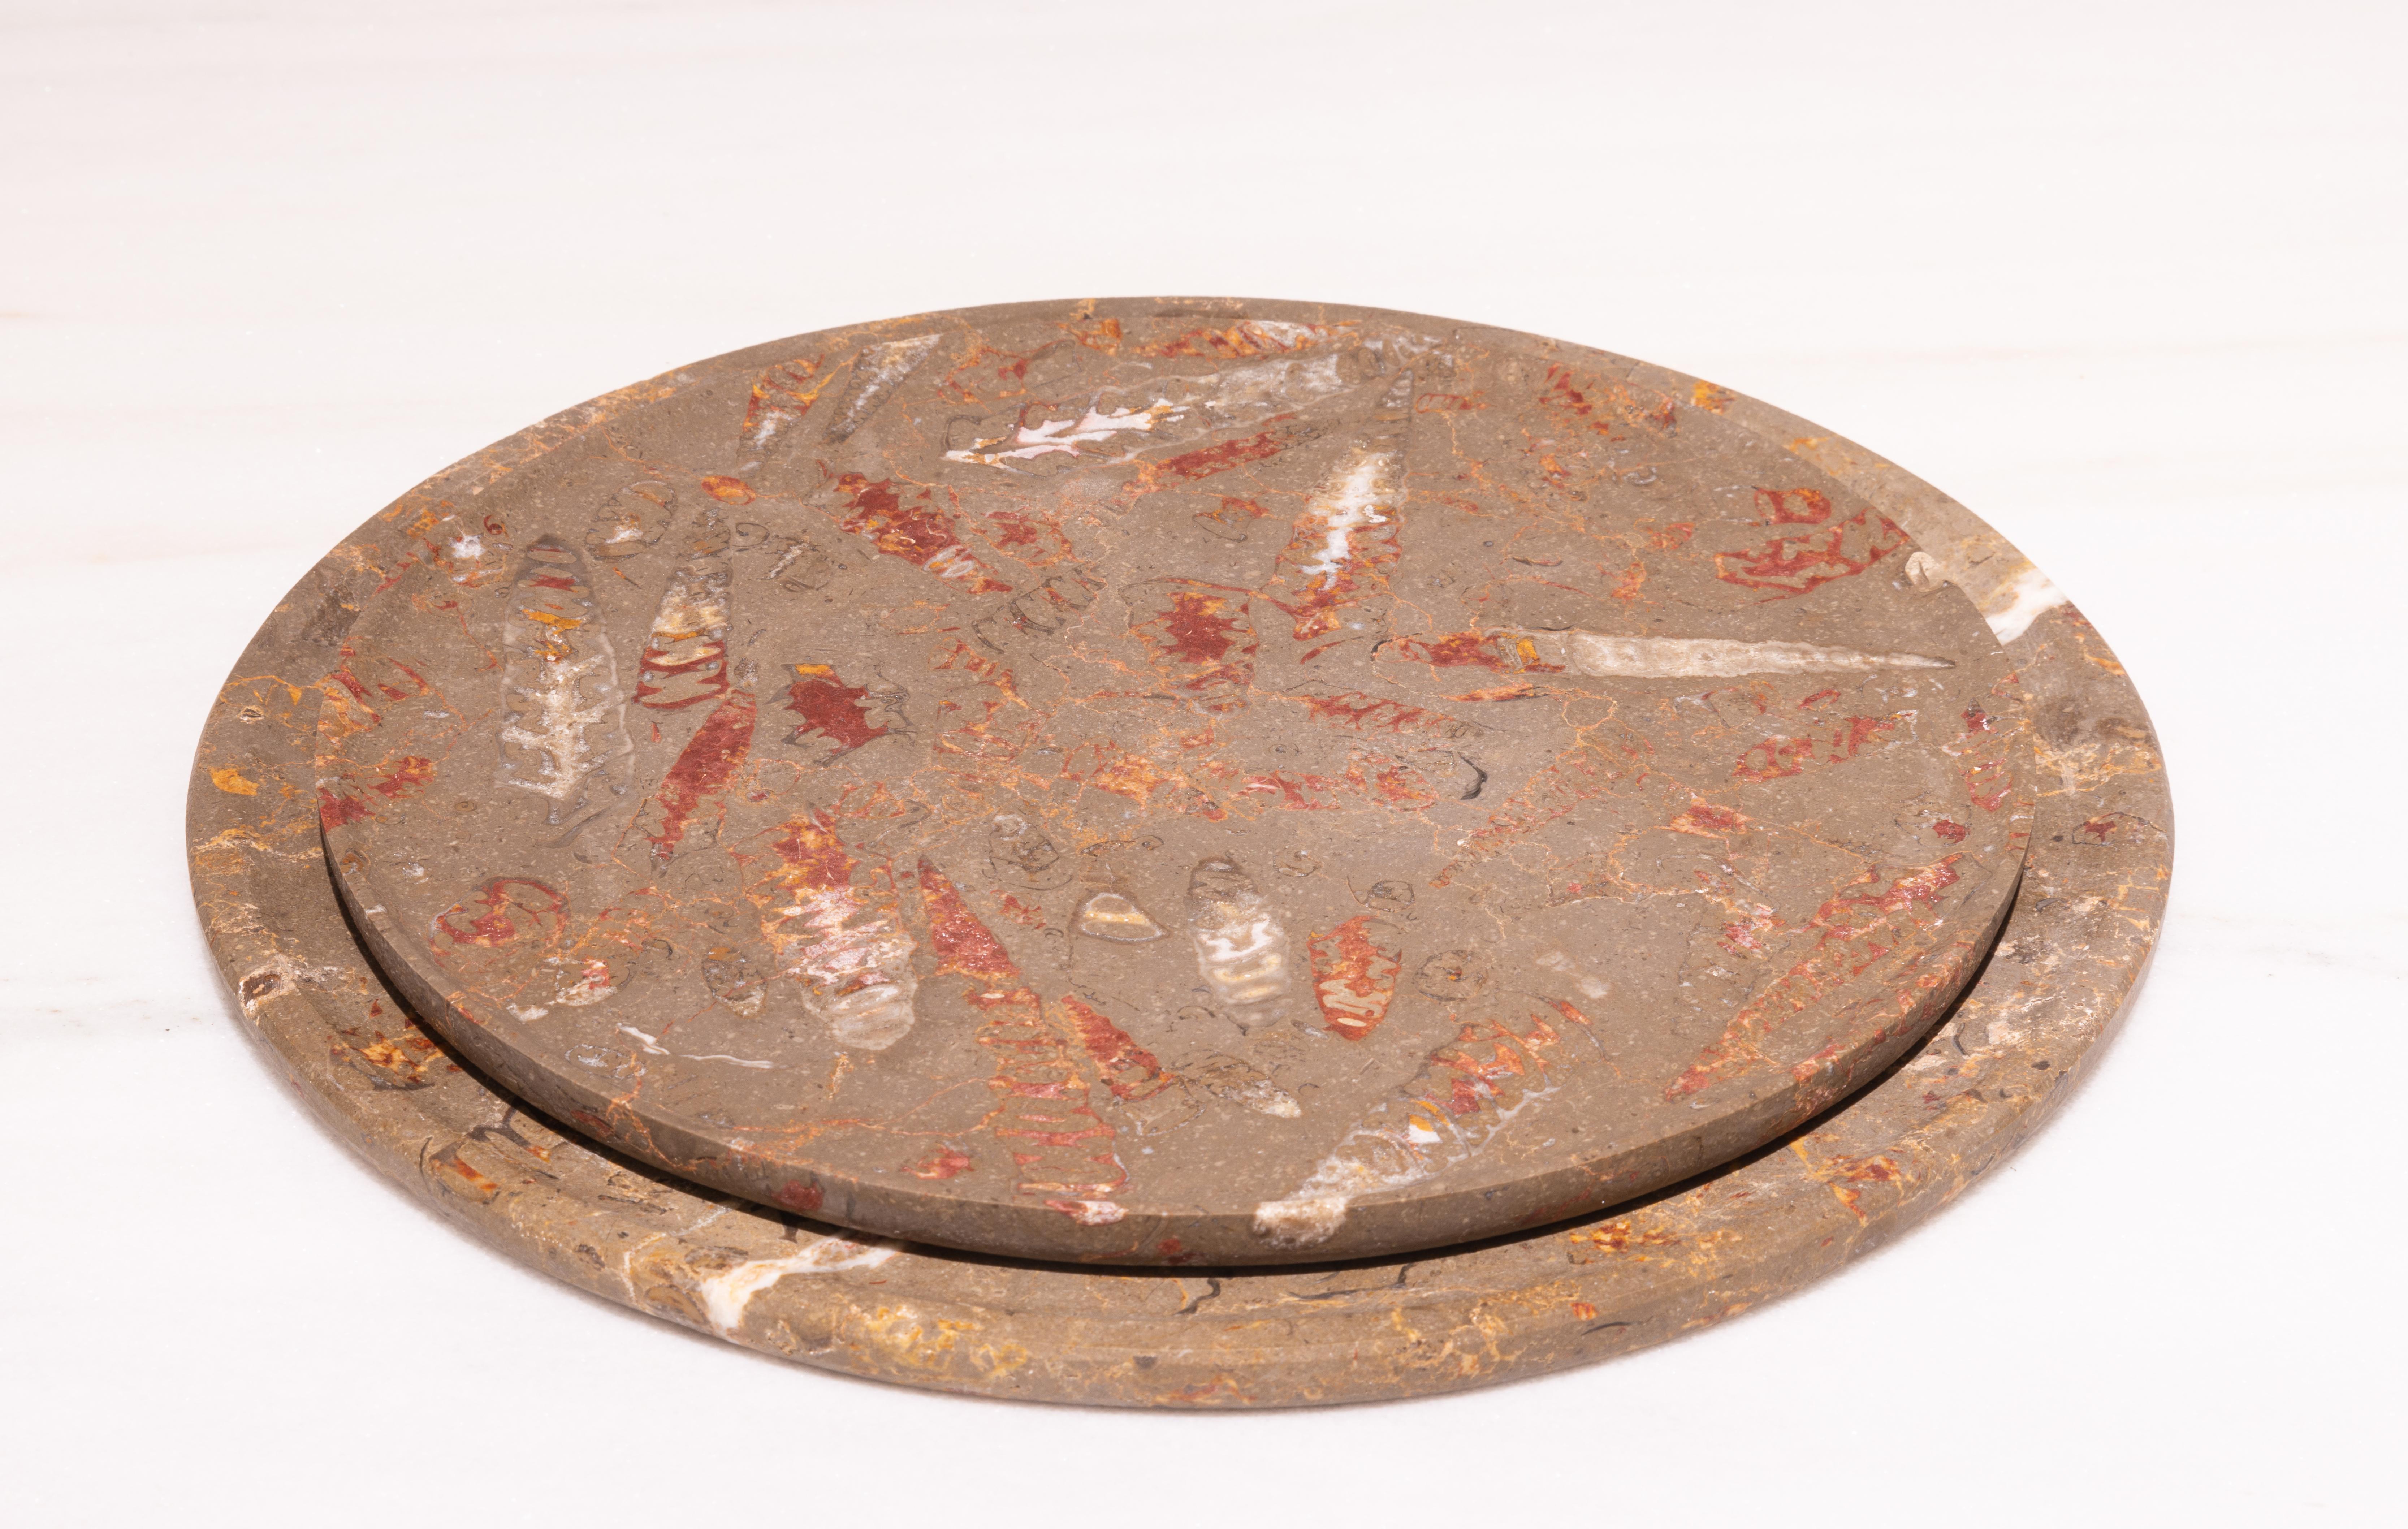 Spanish Aina Contemporary Jurassic Fossil Marble Mare Plate, Living Collection For Sale